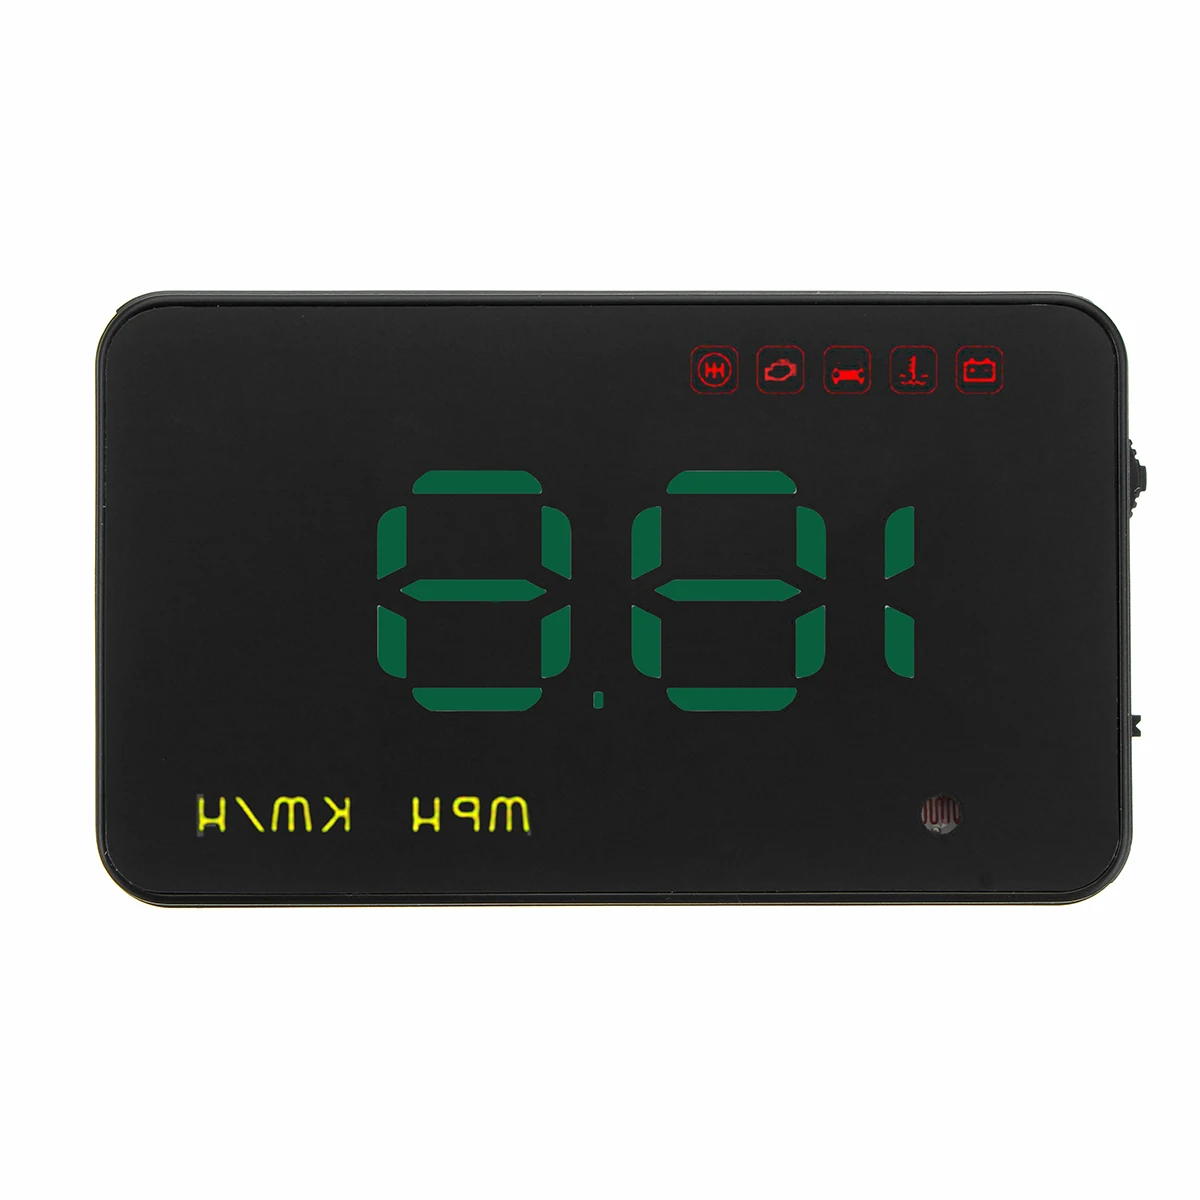 3.5 Inch Uinversal Digital Auto Car HUD Head Up Display LCD OBD2 Speedometer Overspeed Warning System A1000 Alarm Voltage